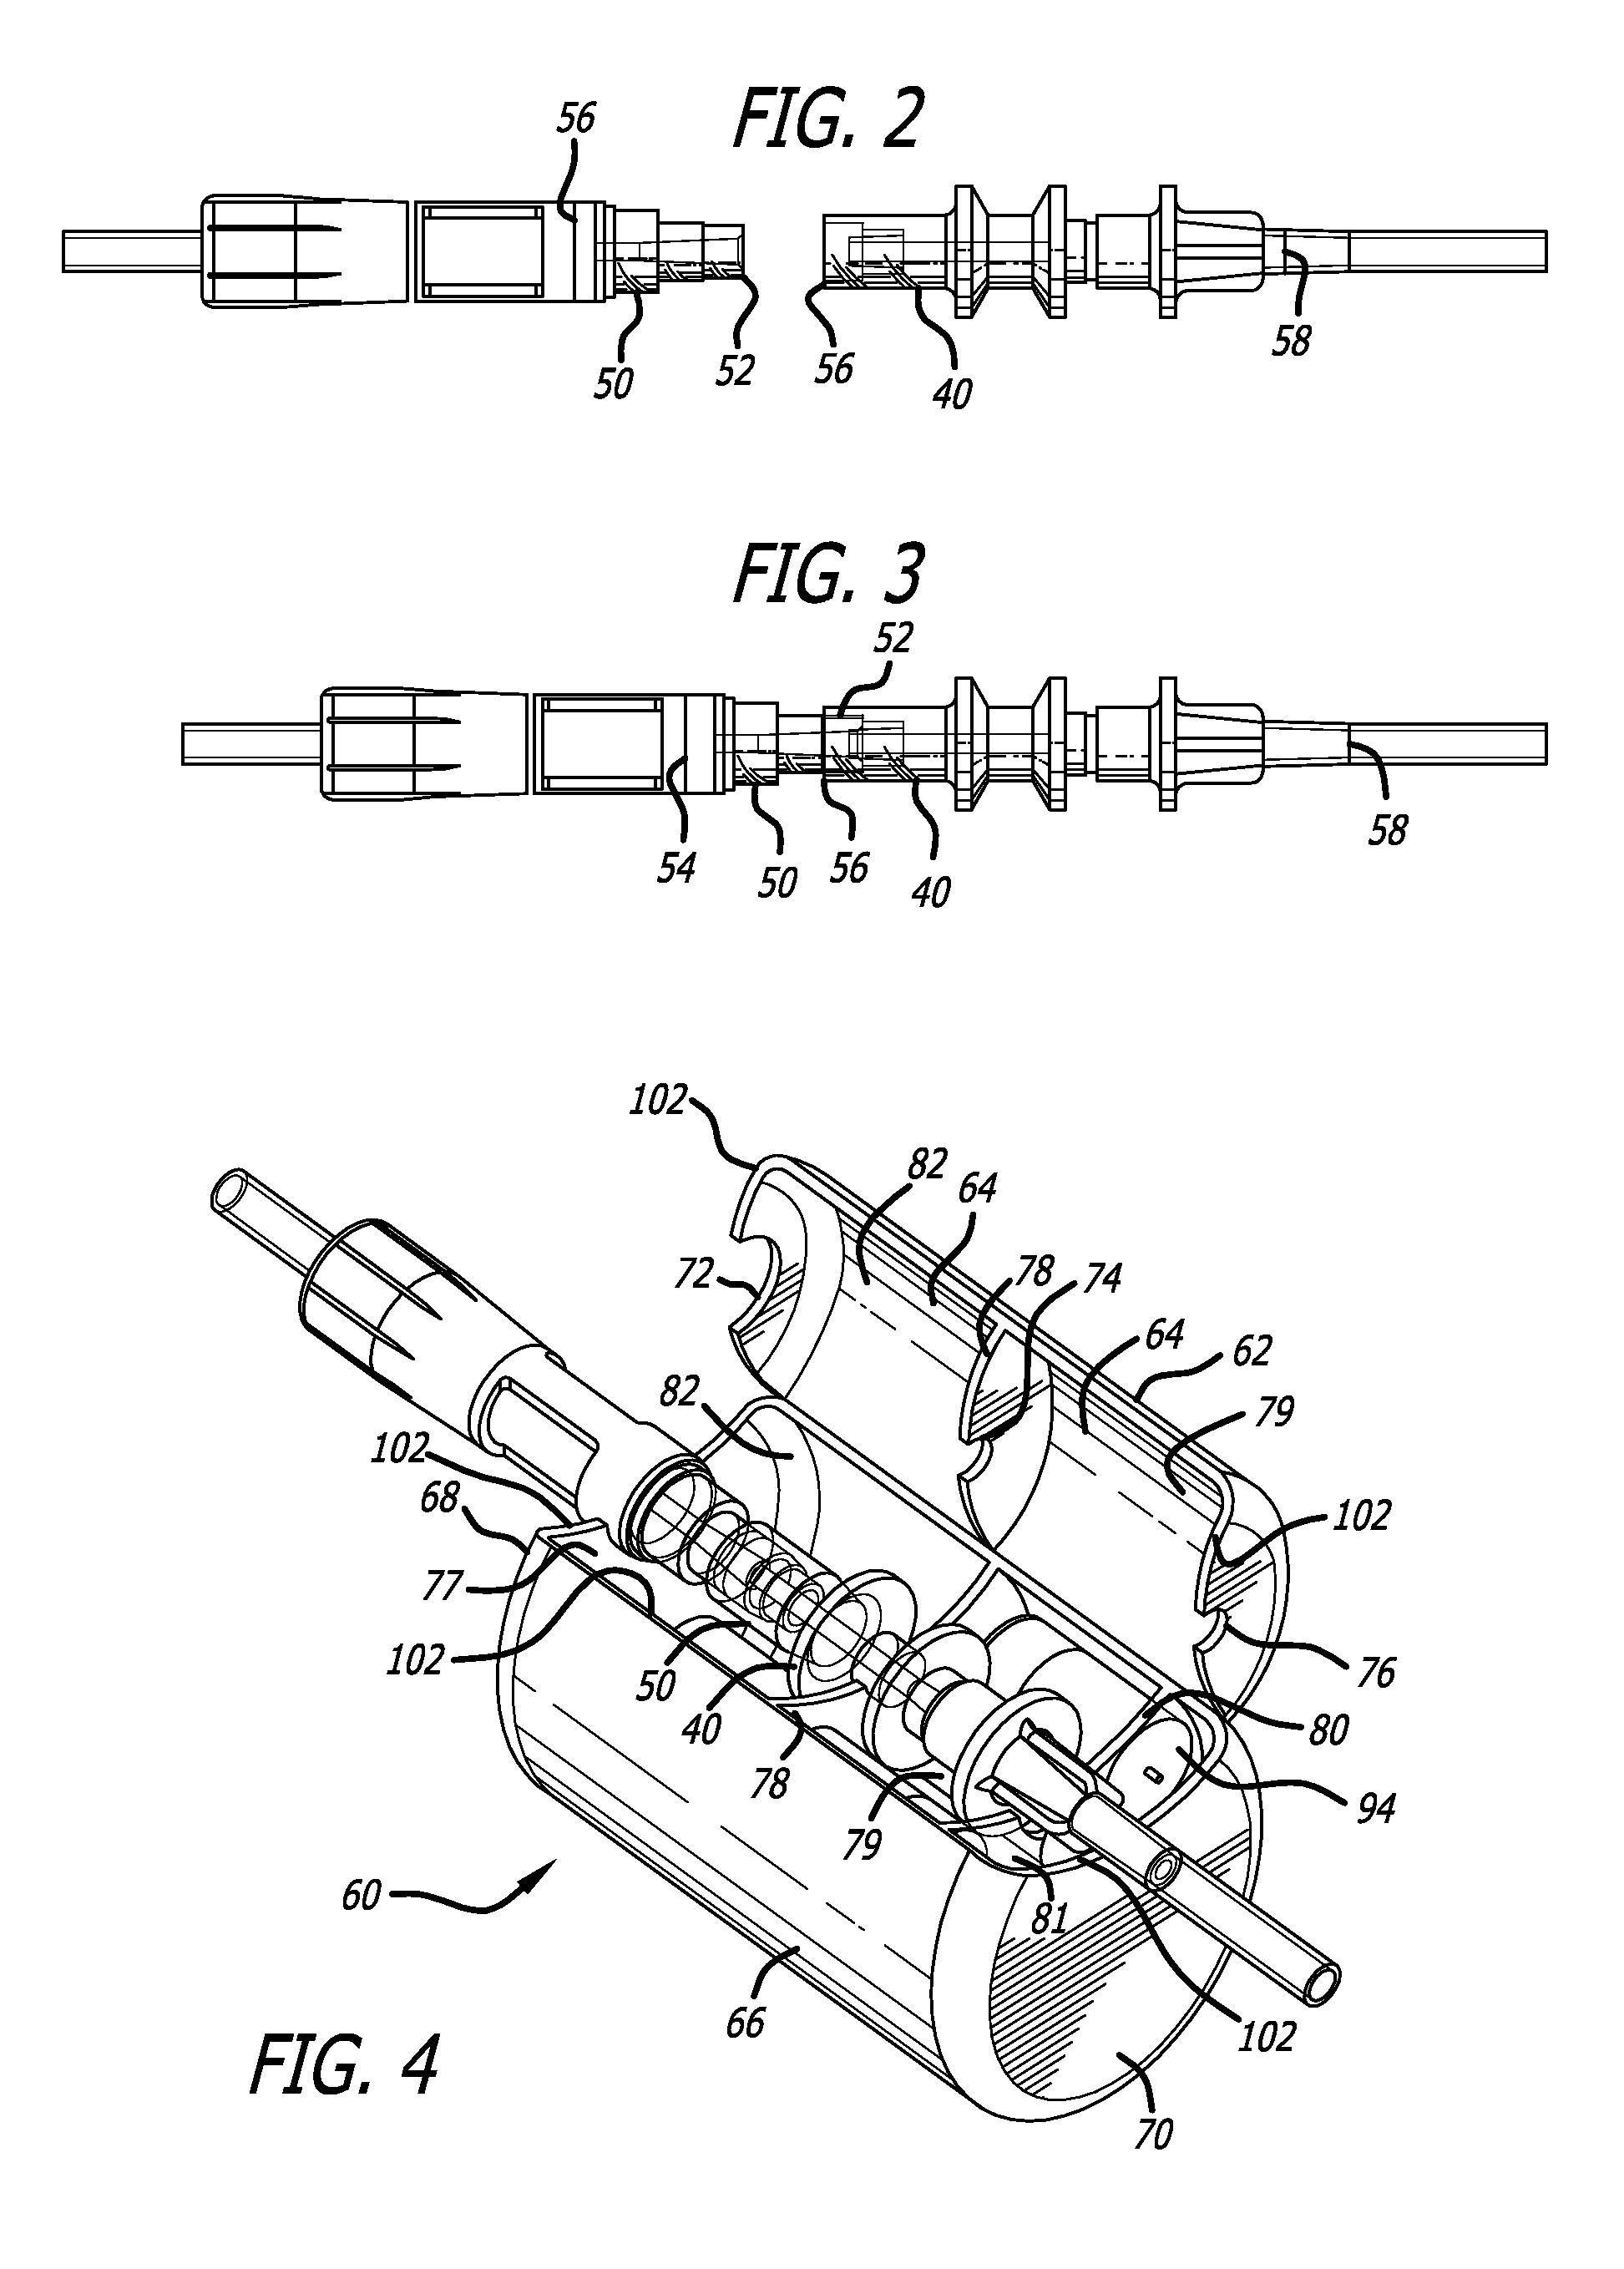 Apparatus for disinfecting or sterilizing a catheter and method of use